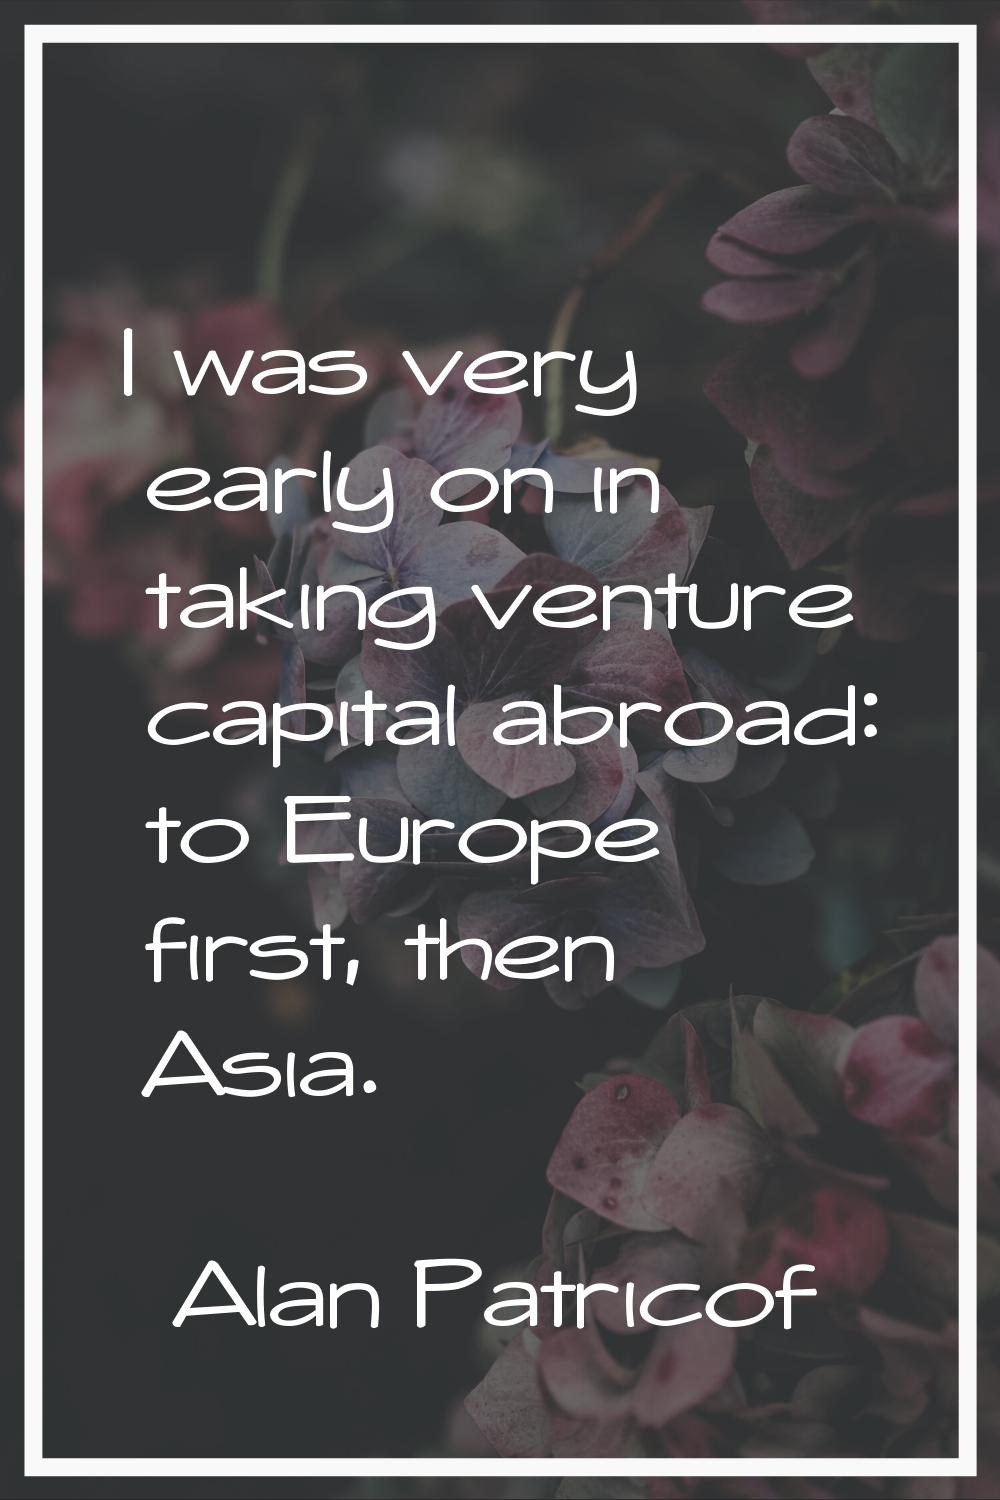 I was very early on in taking venture capital abroad: to Europe first, then Asia.